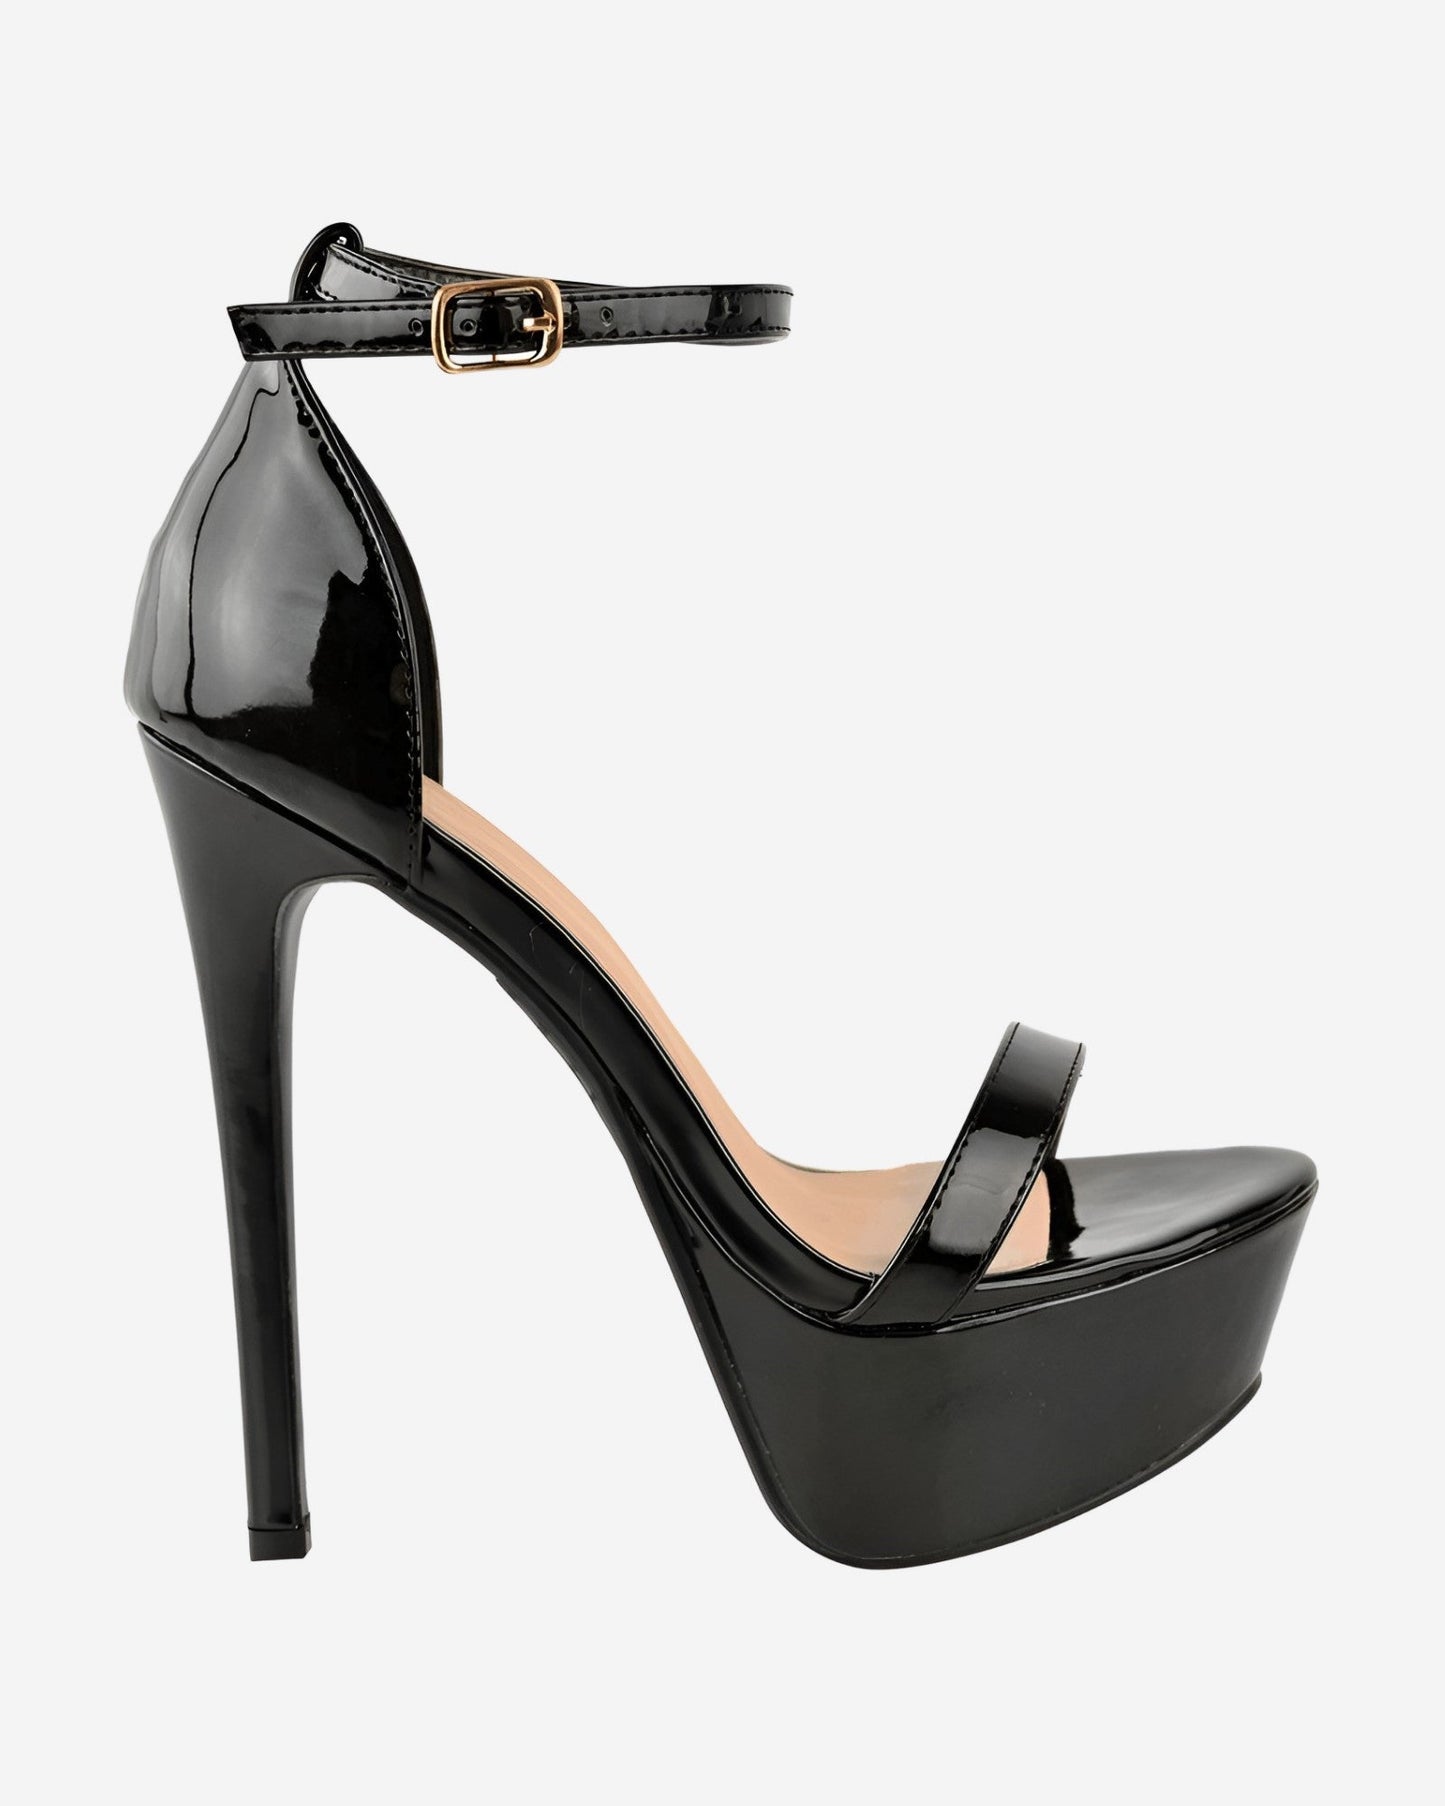 Shoes Strappy Platform High Heels Shoes